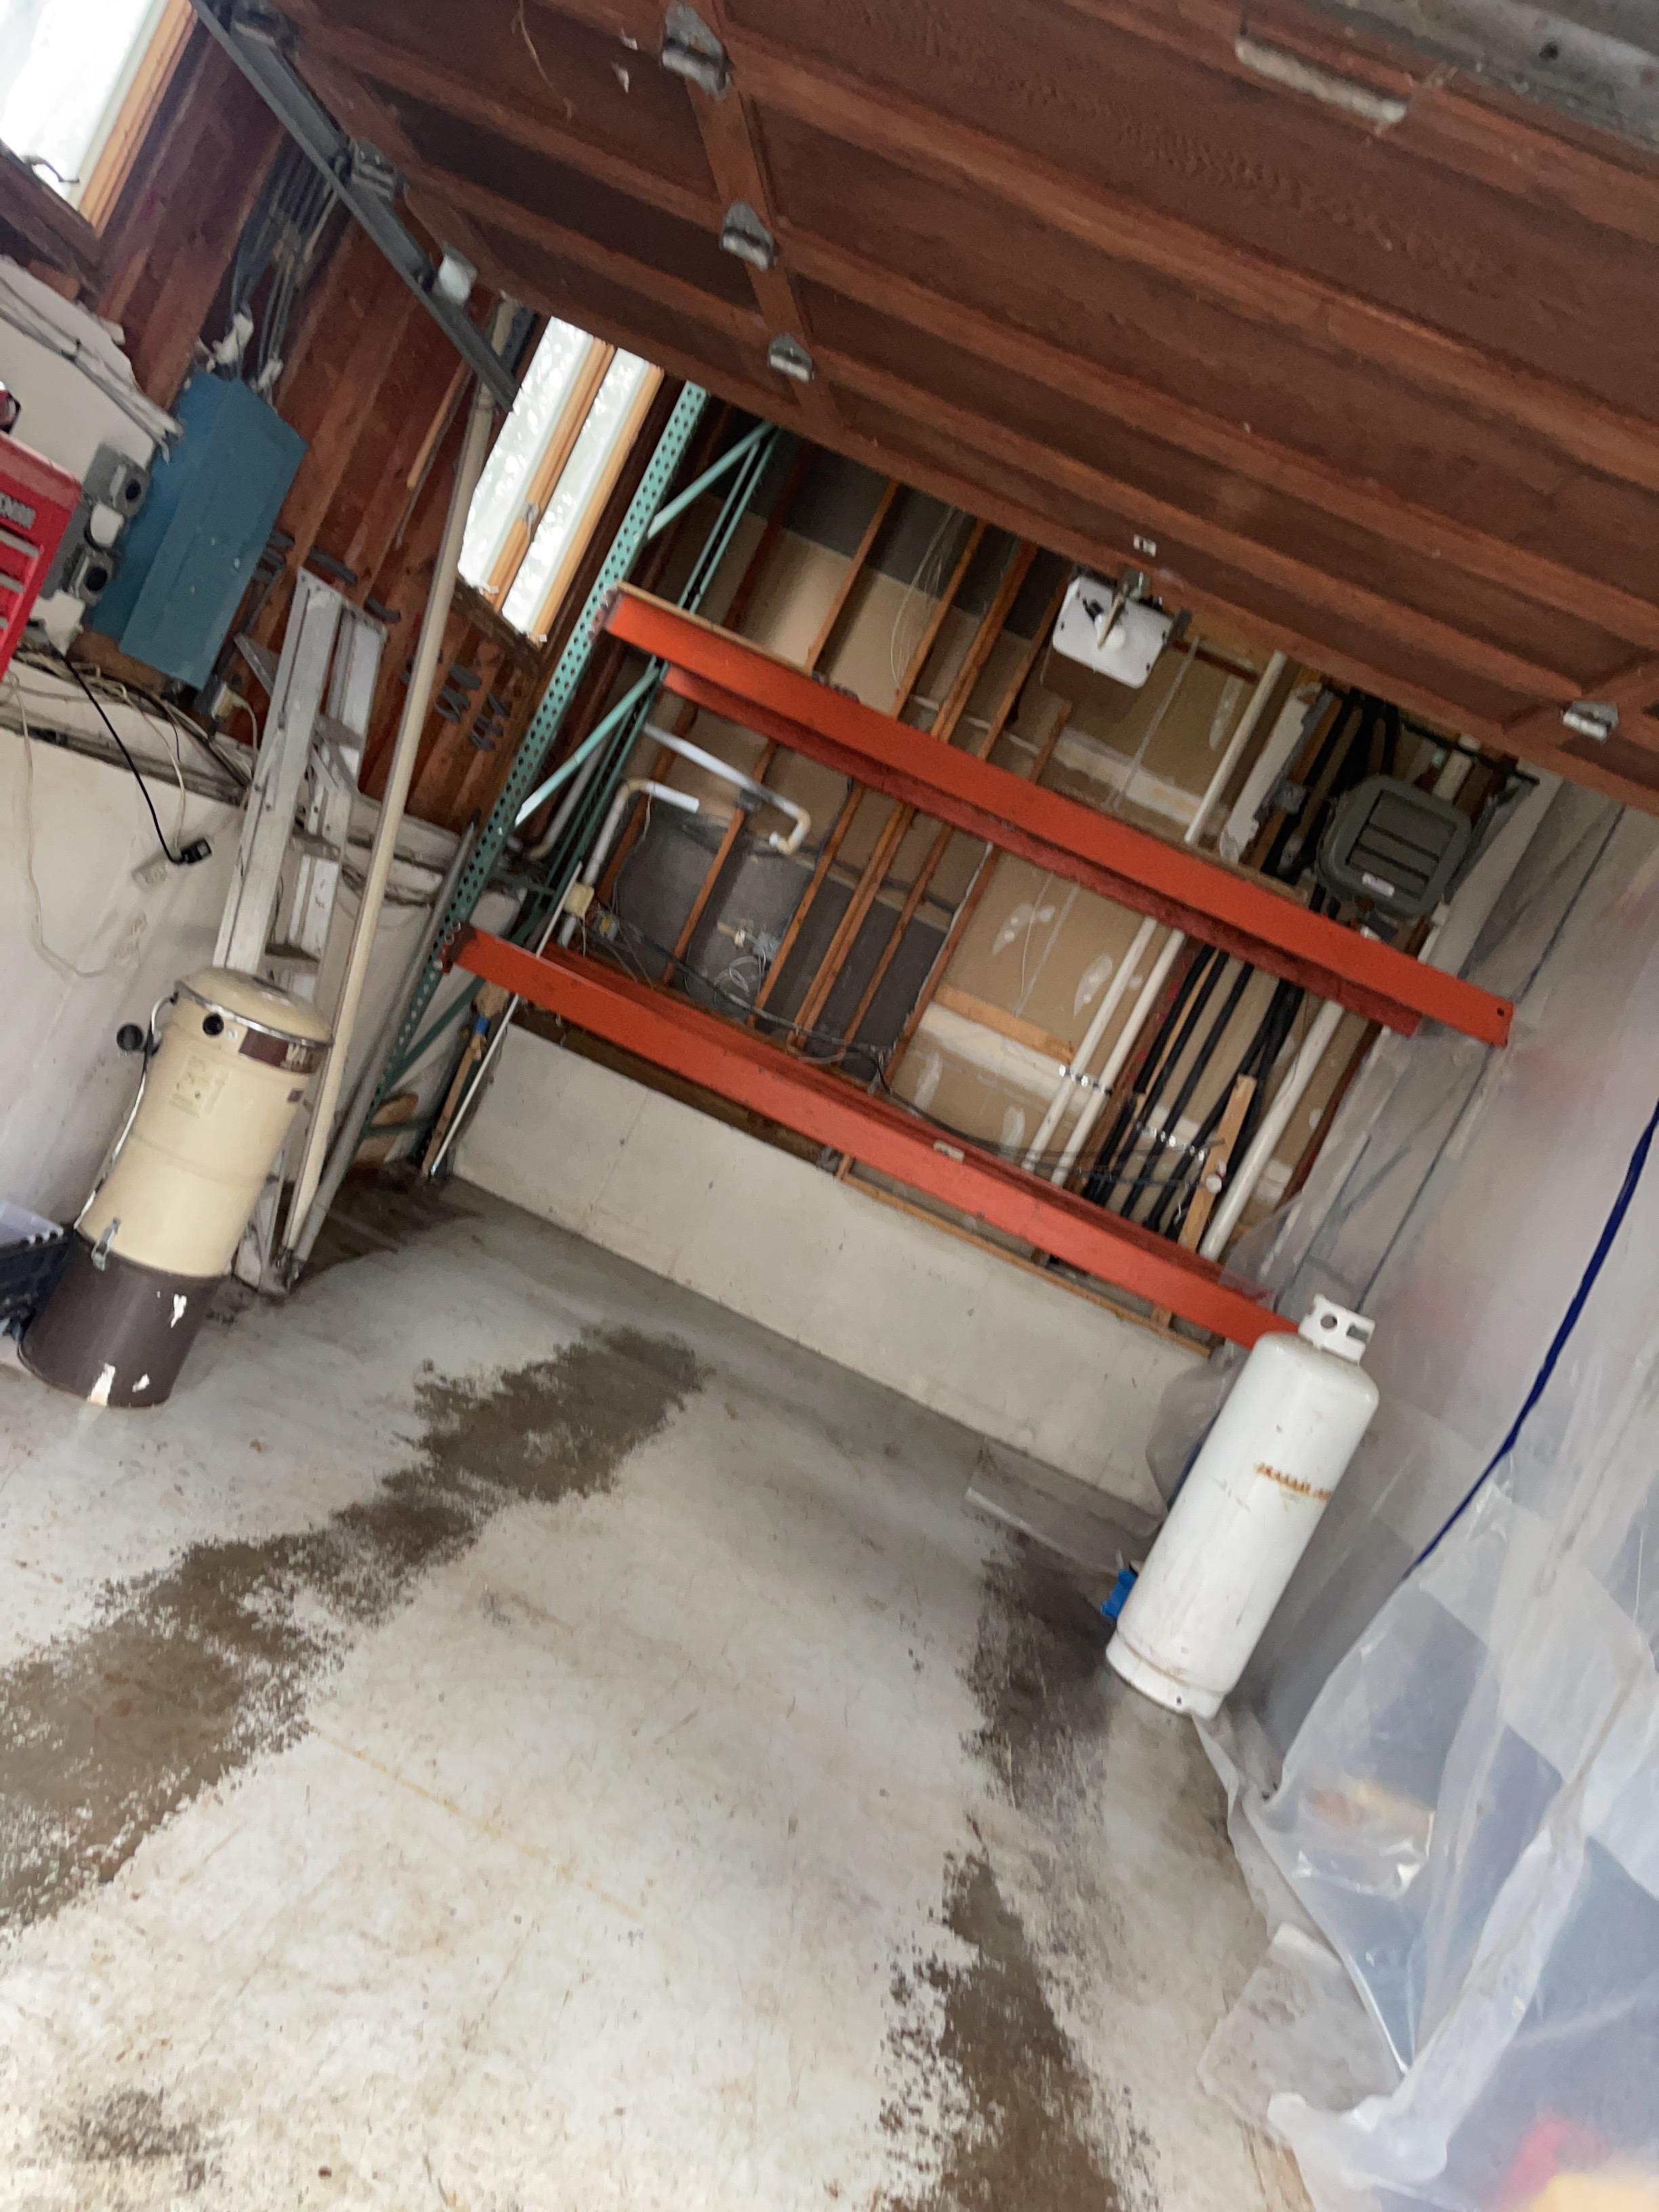 Garage cleared, cleaned and disinfected. Wet drywall removed.